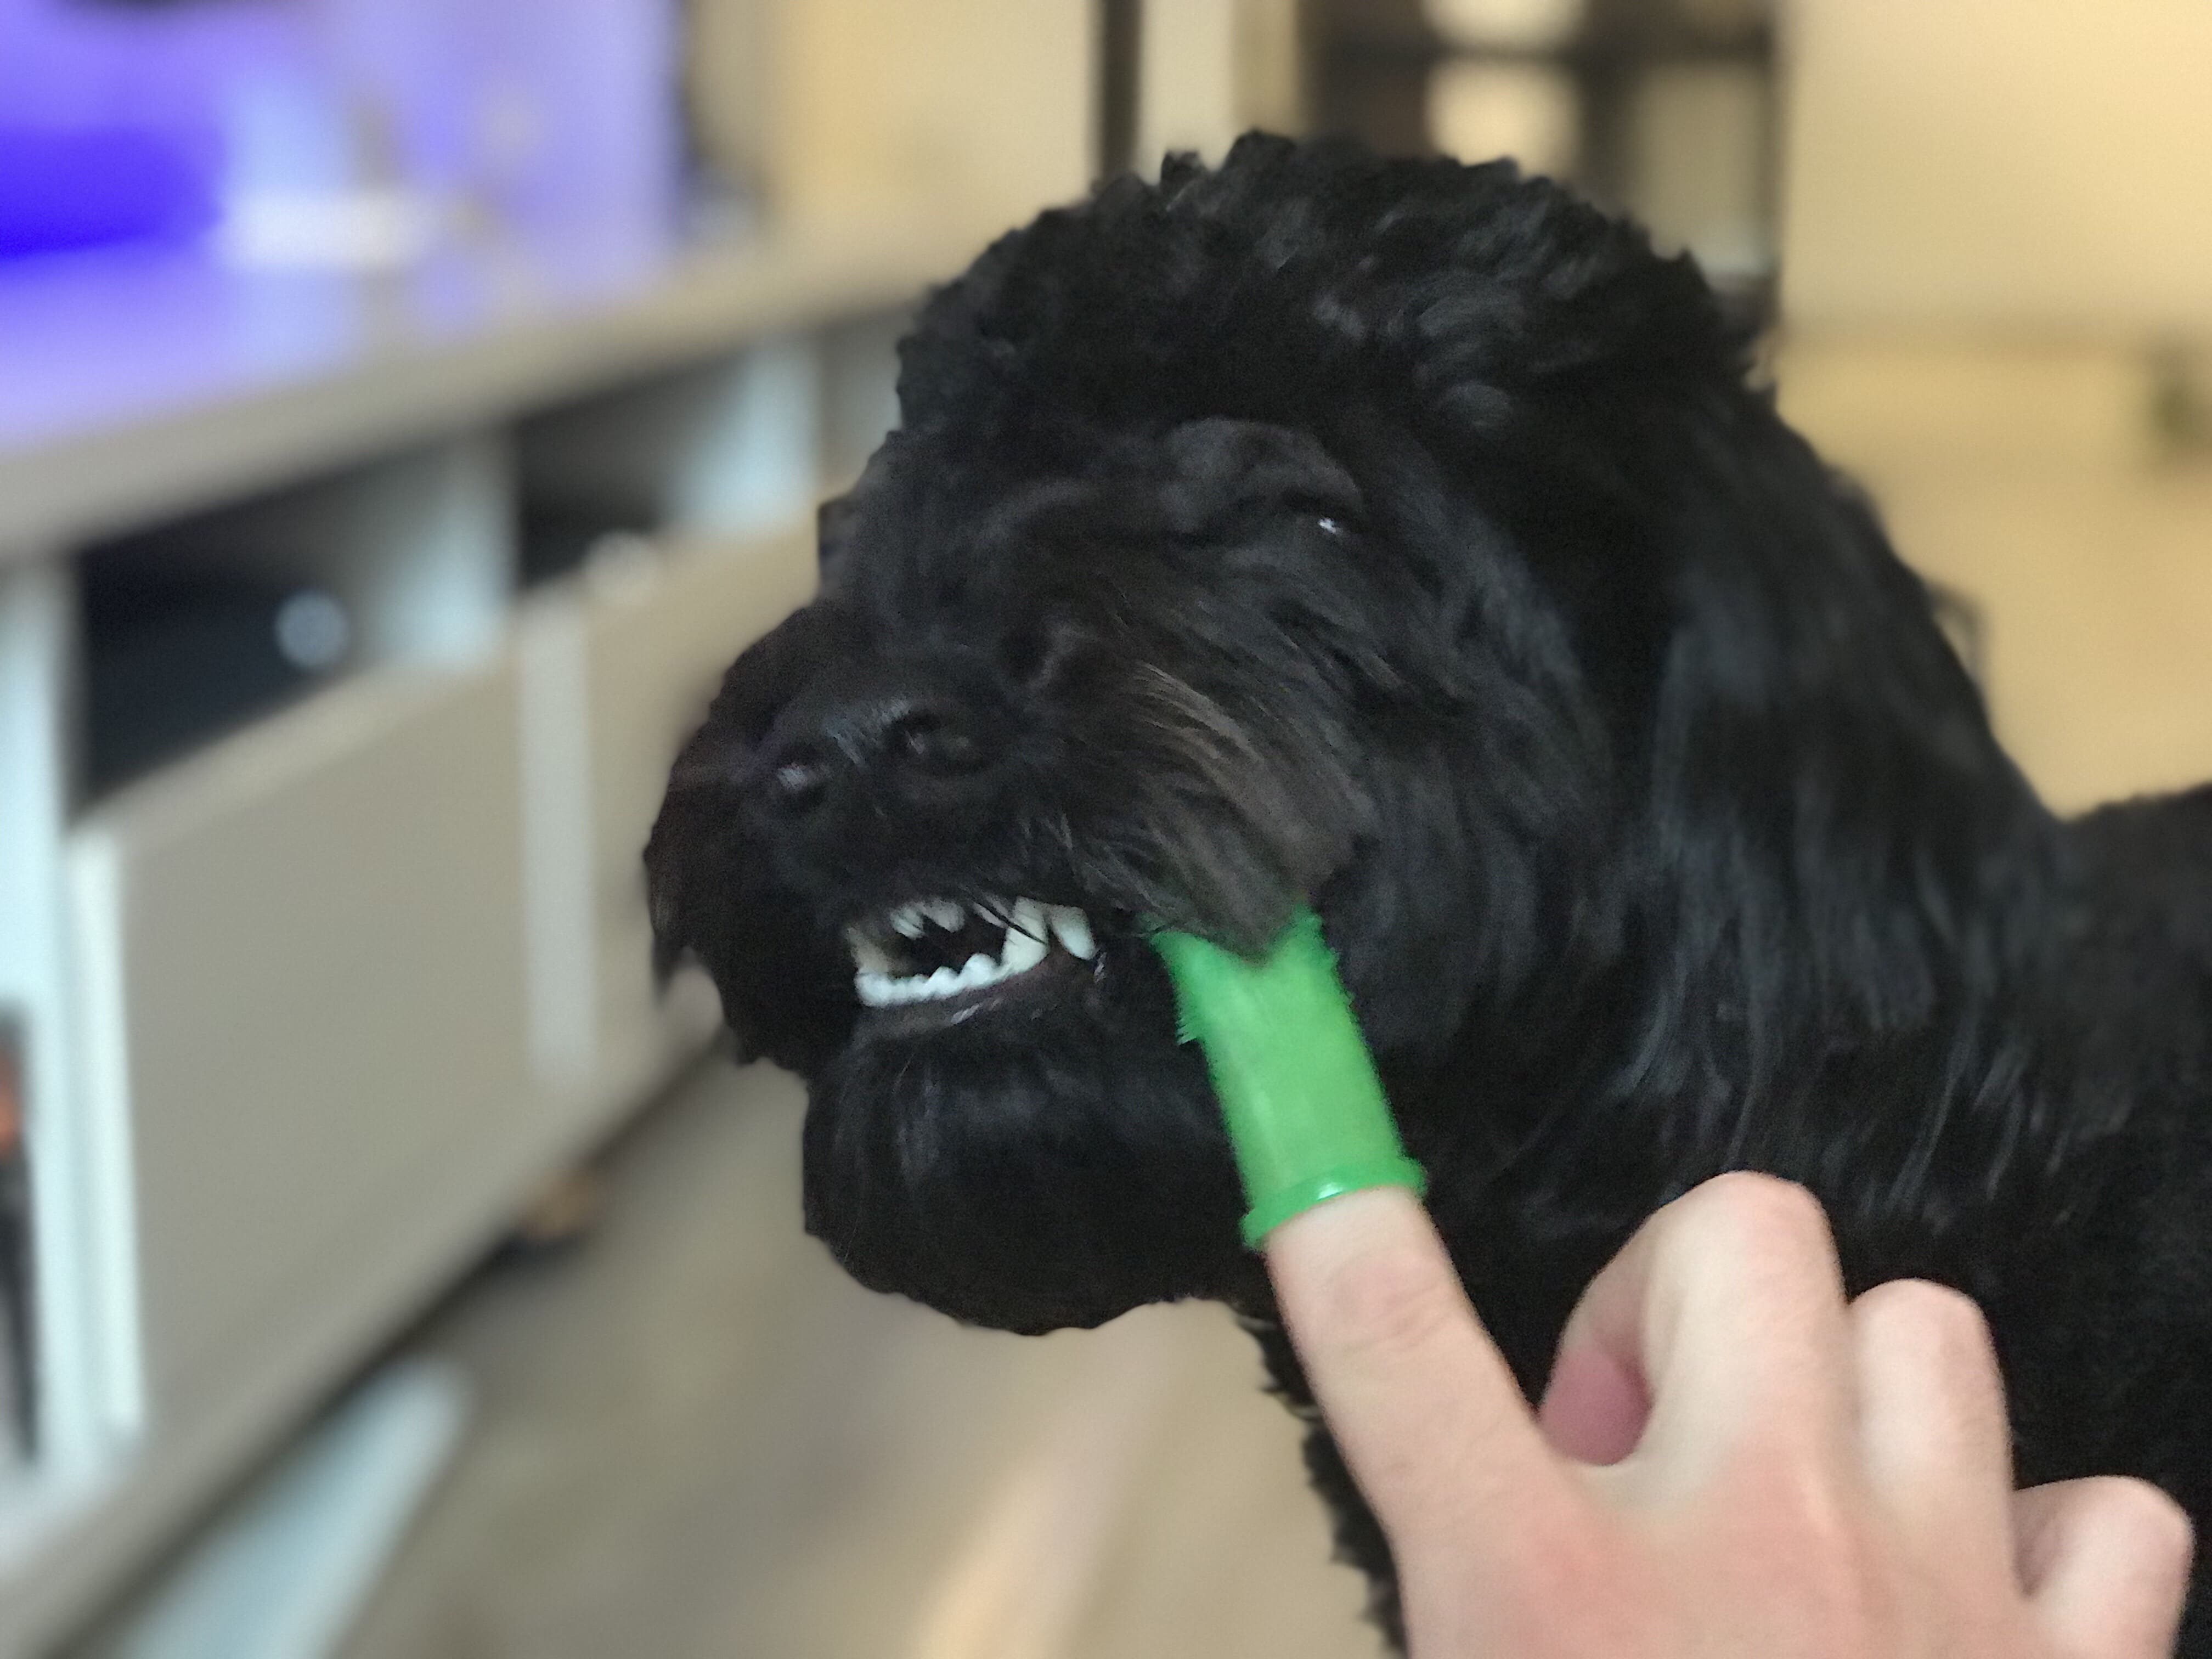 what can i use to brush my dog's teeth